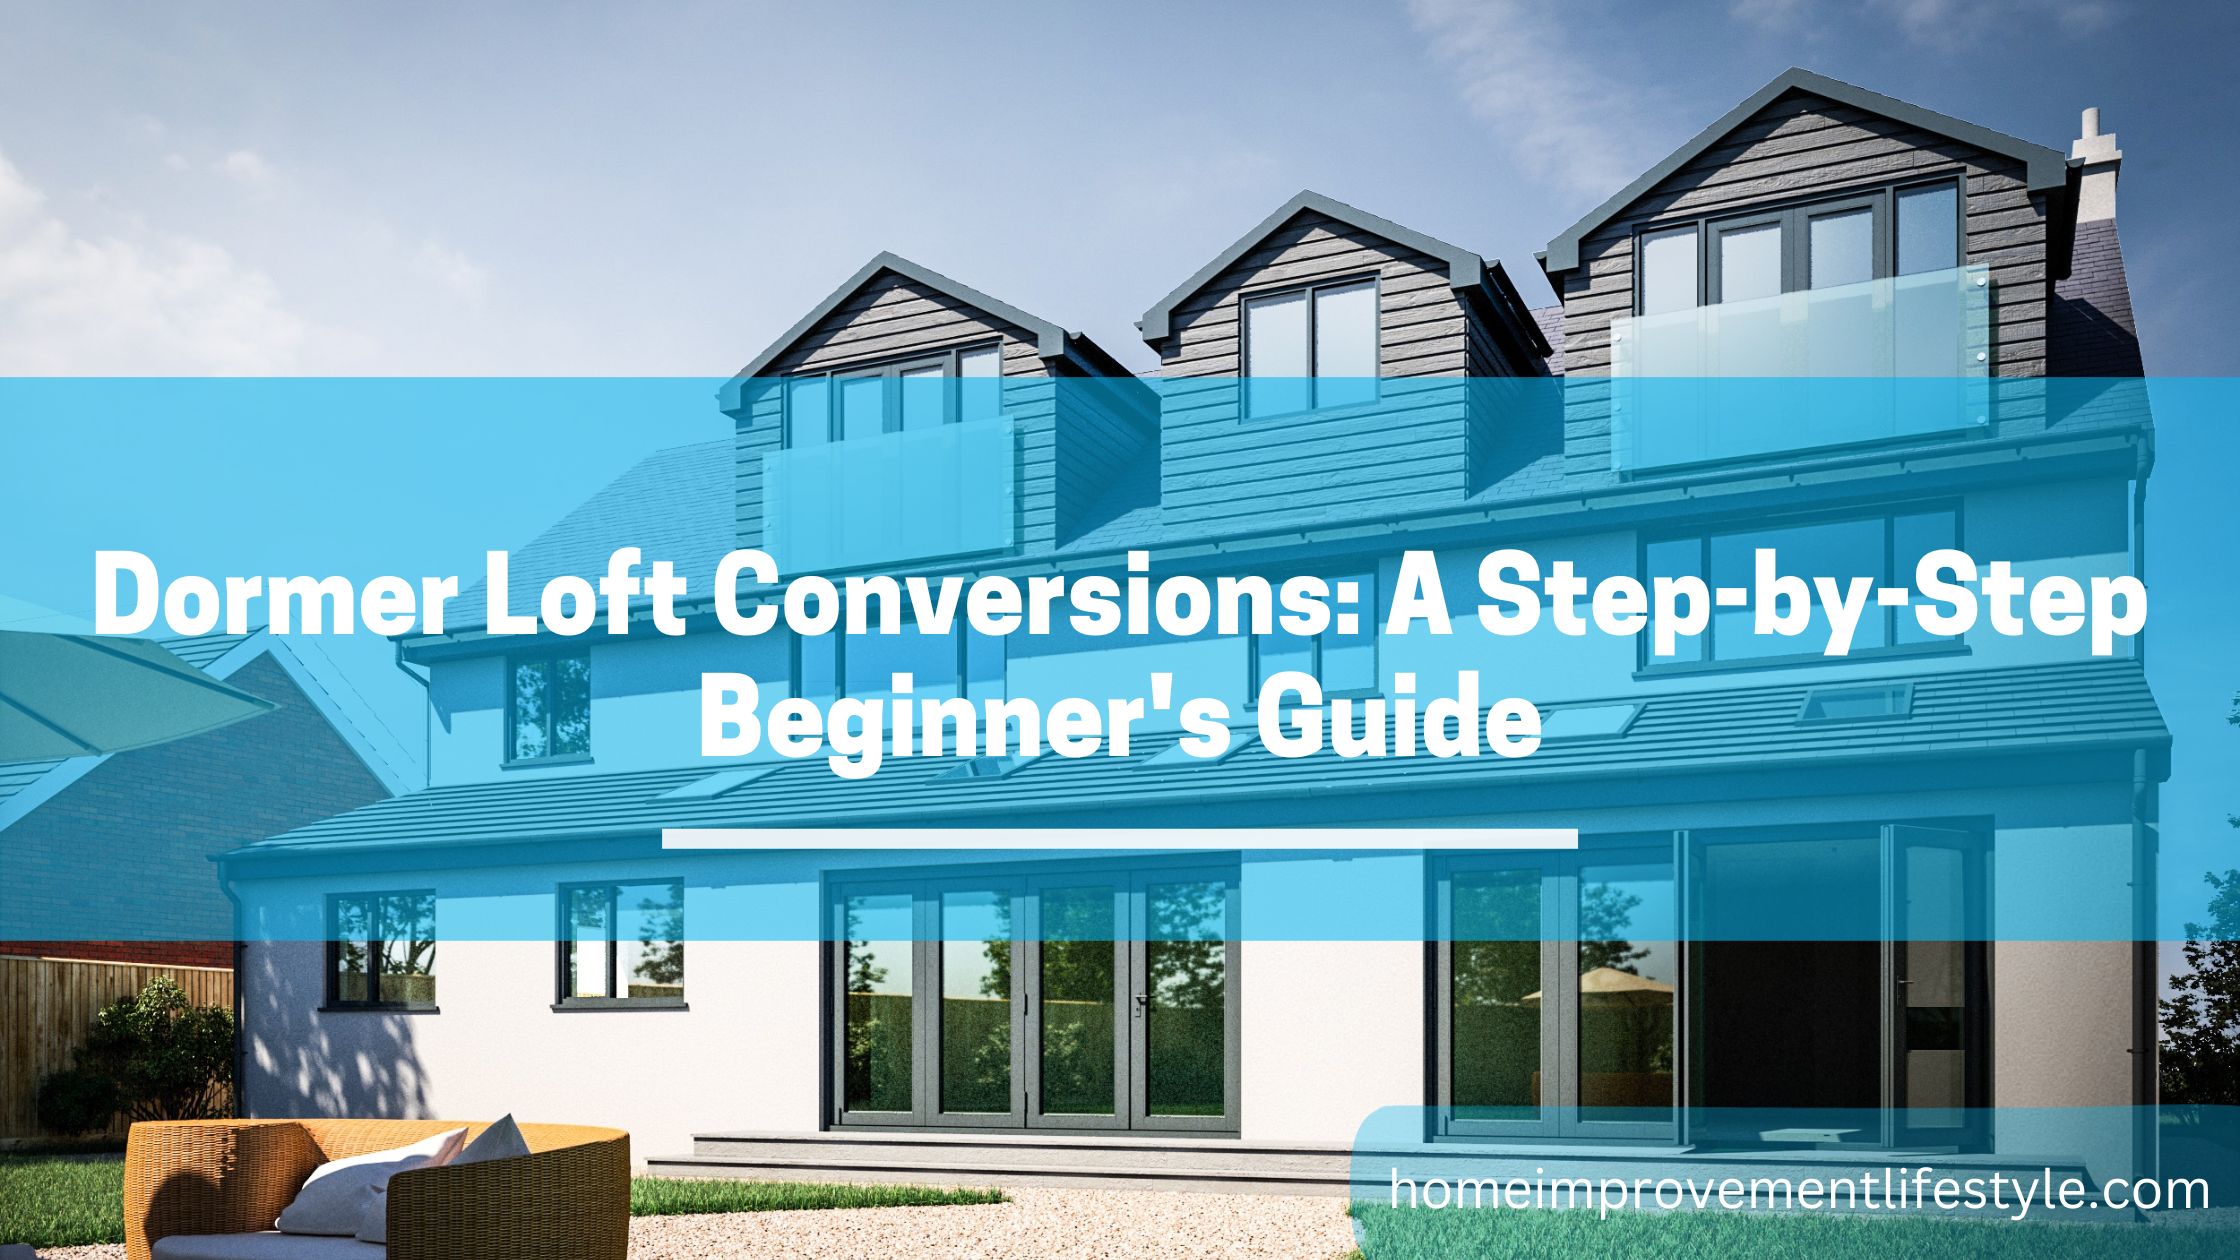 Dormer Loft Conversions: A Step-by-Step Beginner's Guide